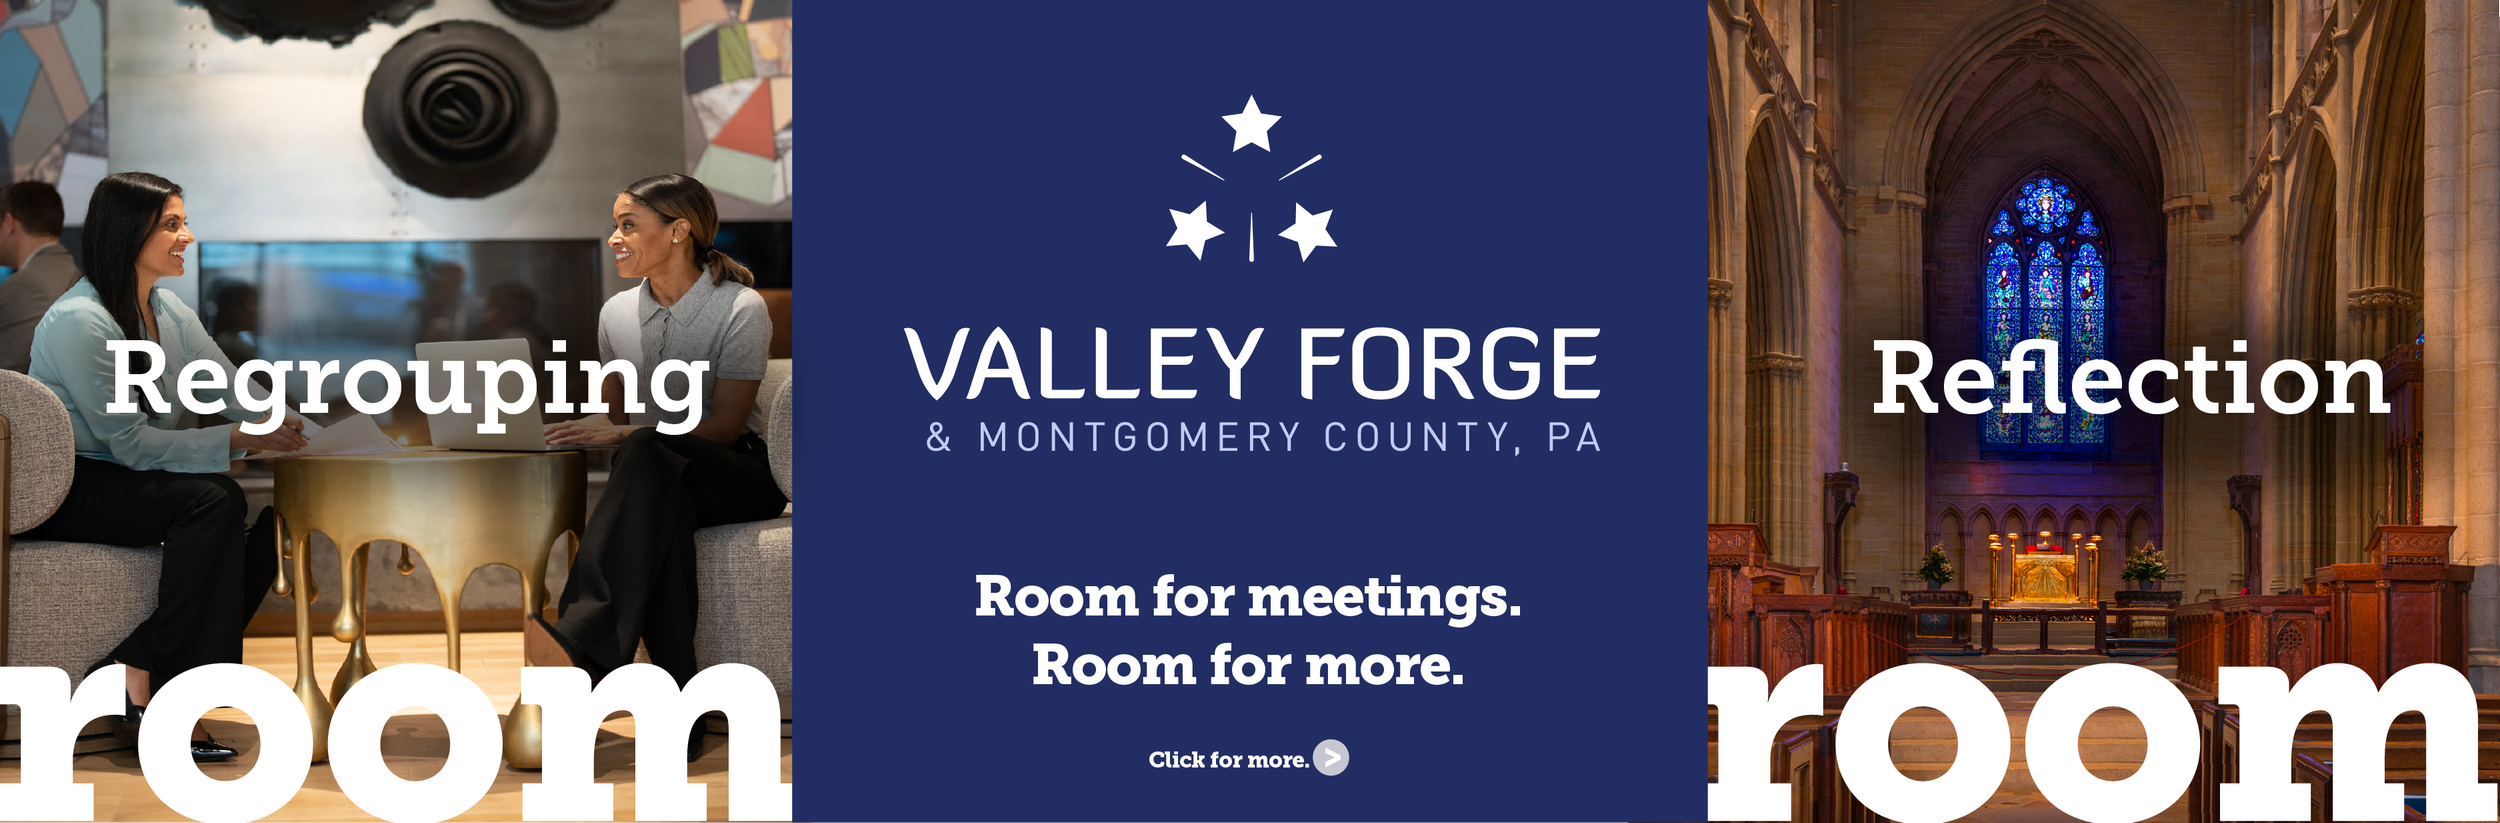 Valley forge ad.png